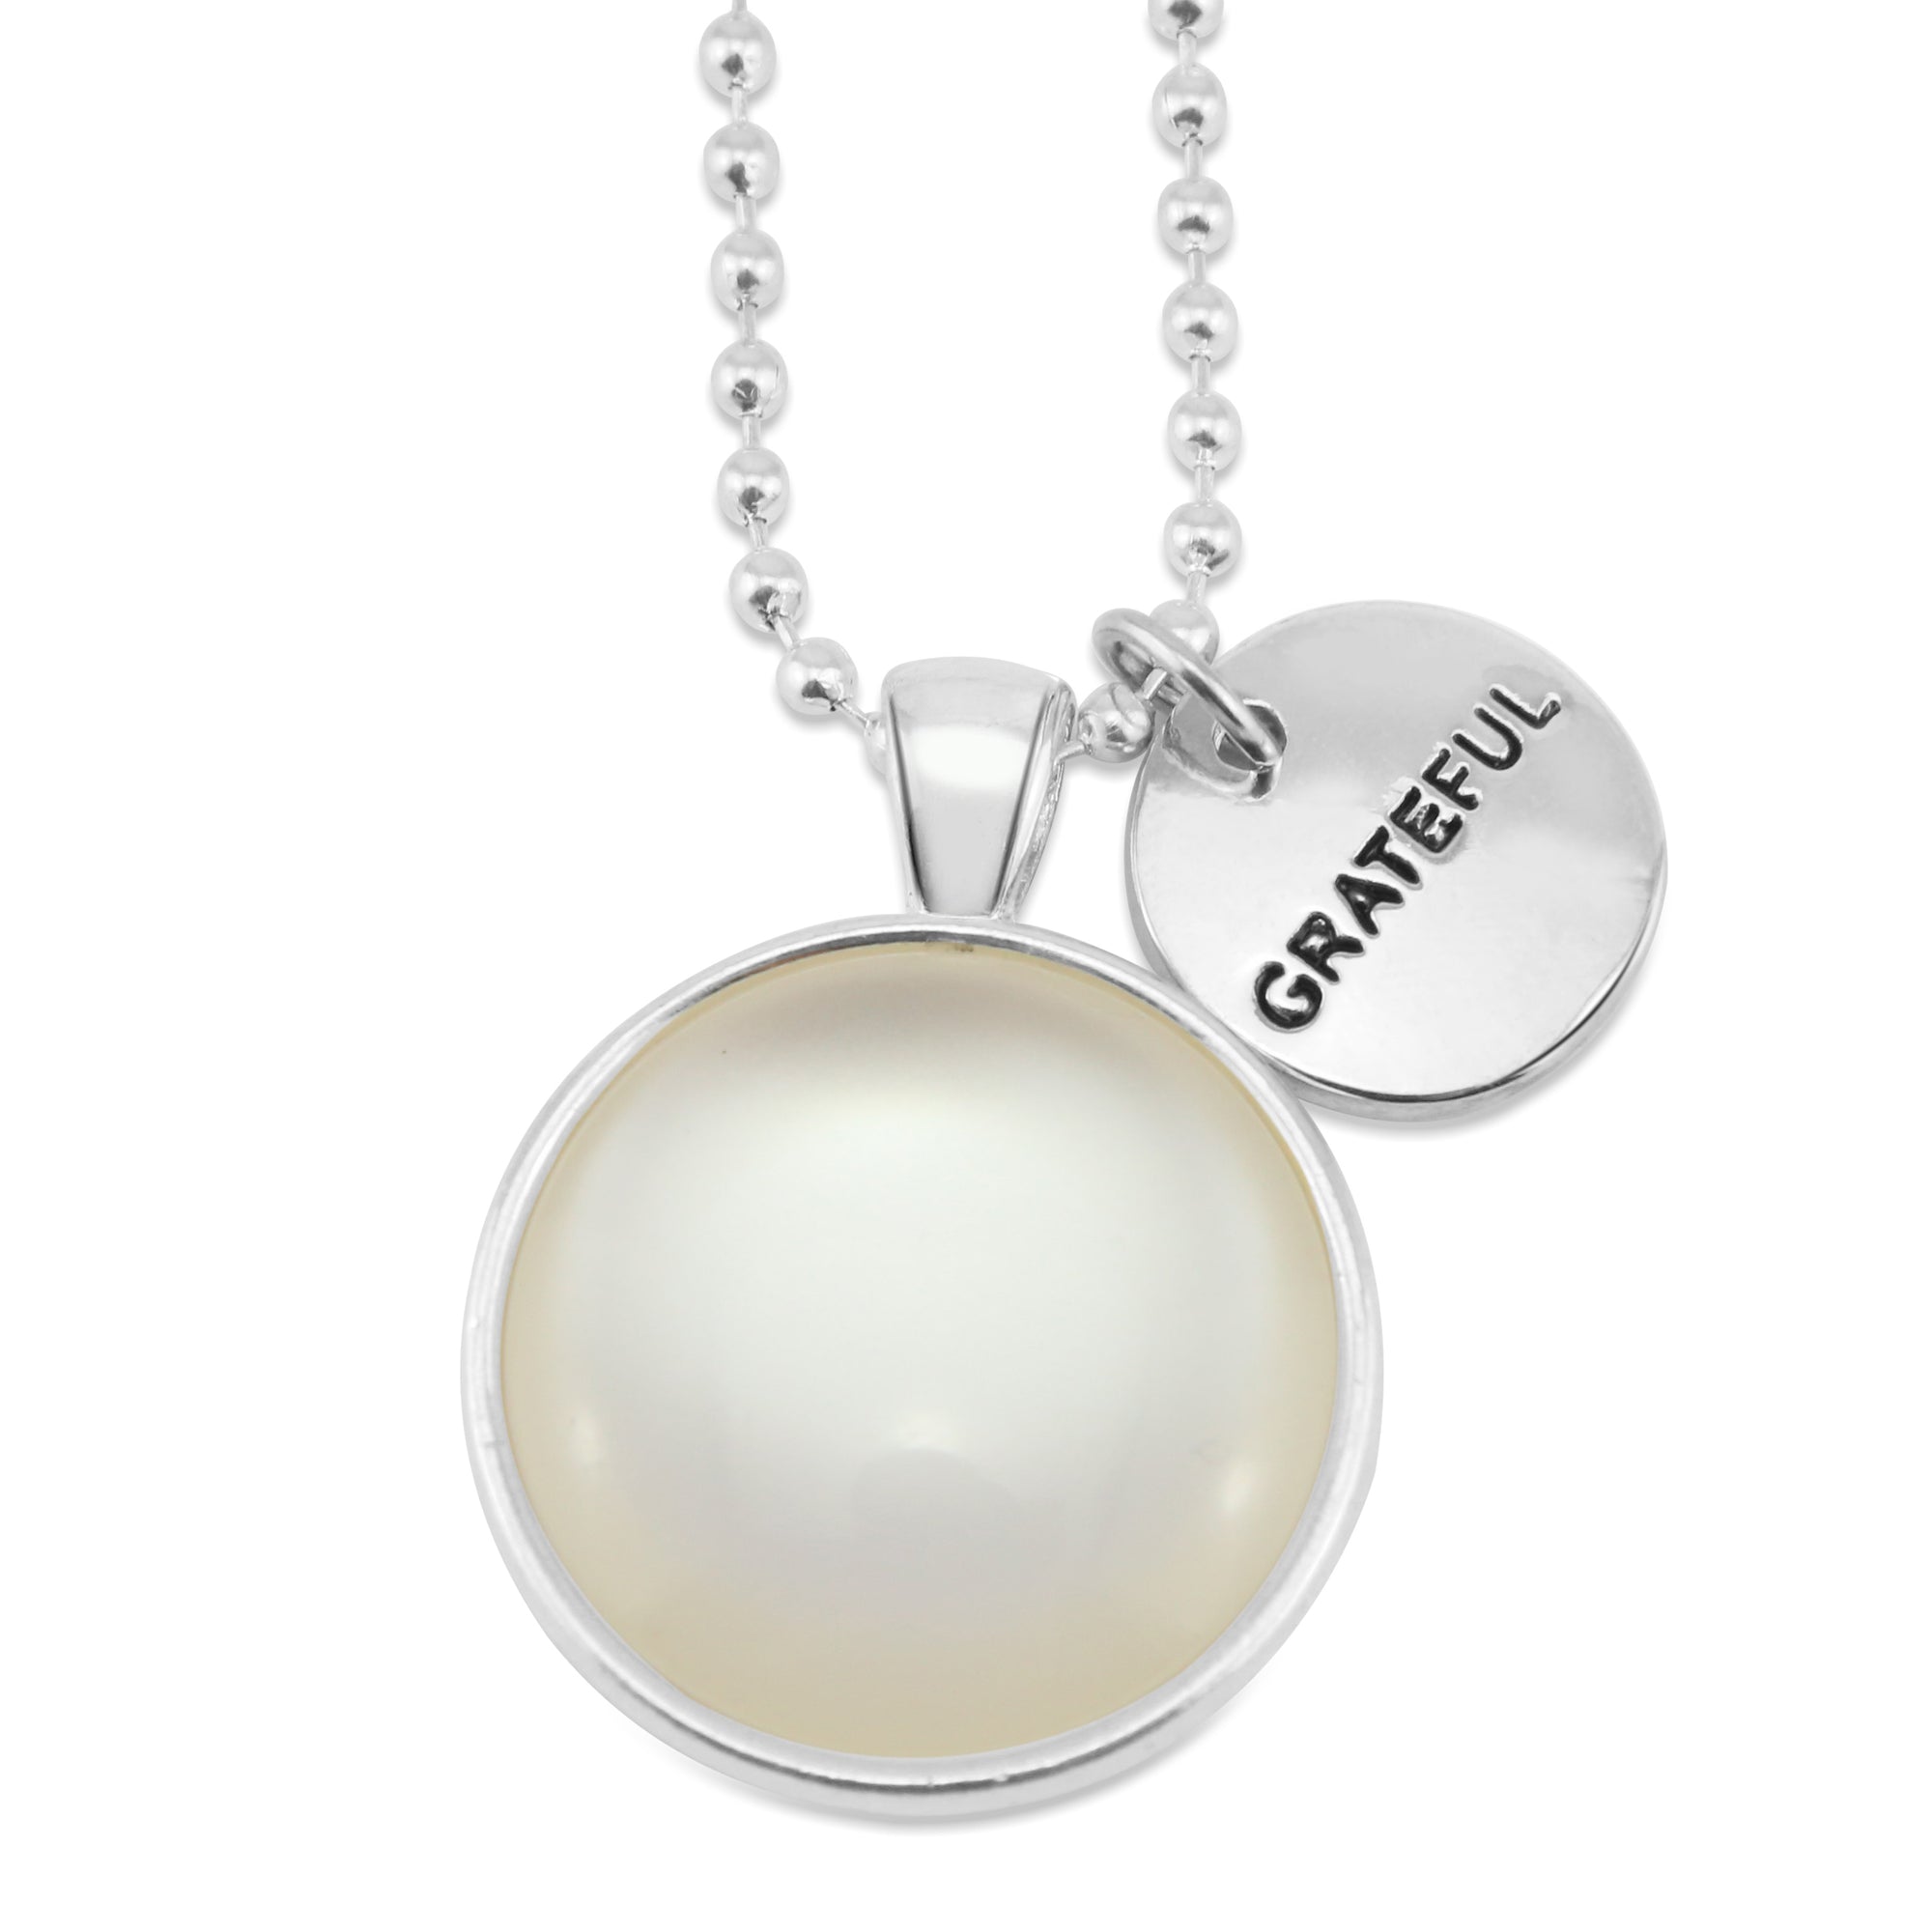 Bright Silver 'GRATEFUL' Necklace - White Pearl Resin (11115)